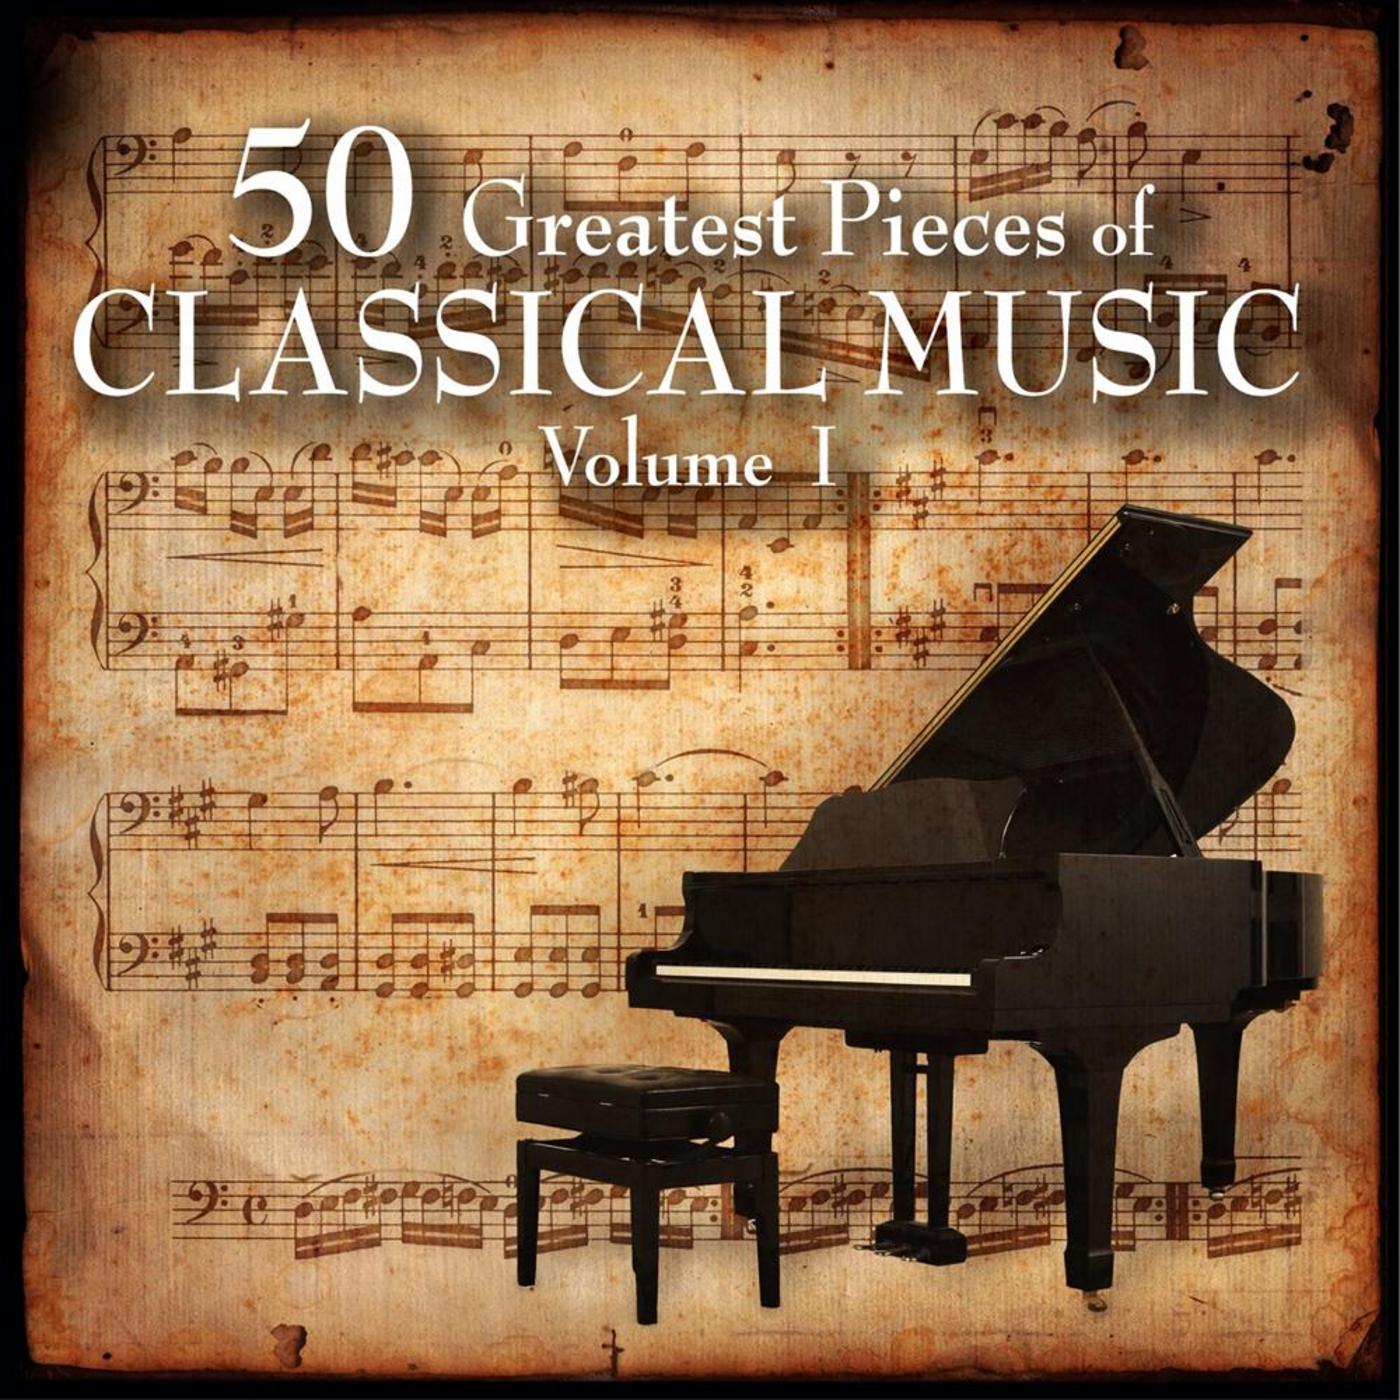 The 50 Greatest Pieces Of Classical Music Beethoven Consort 专辑 网易云音乐